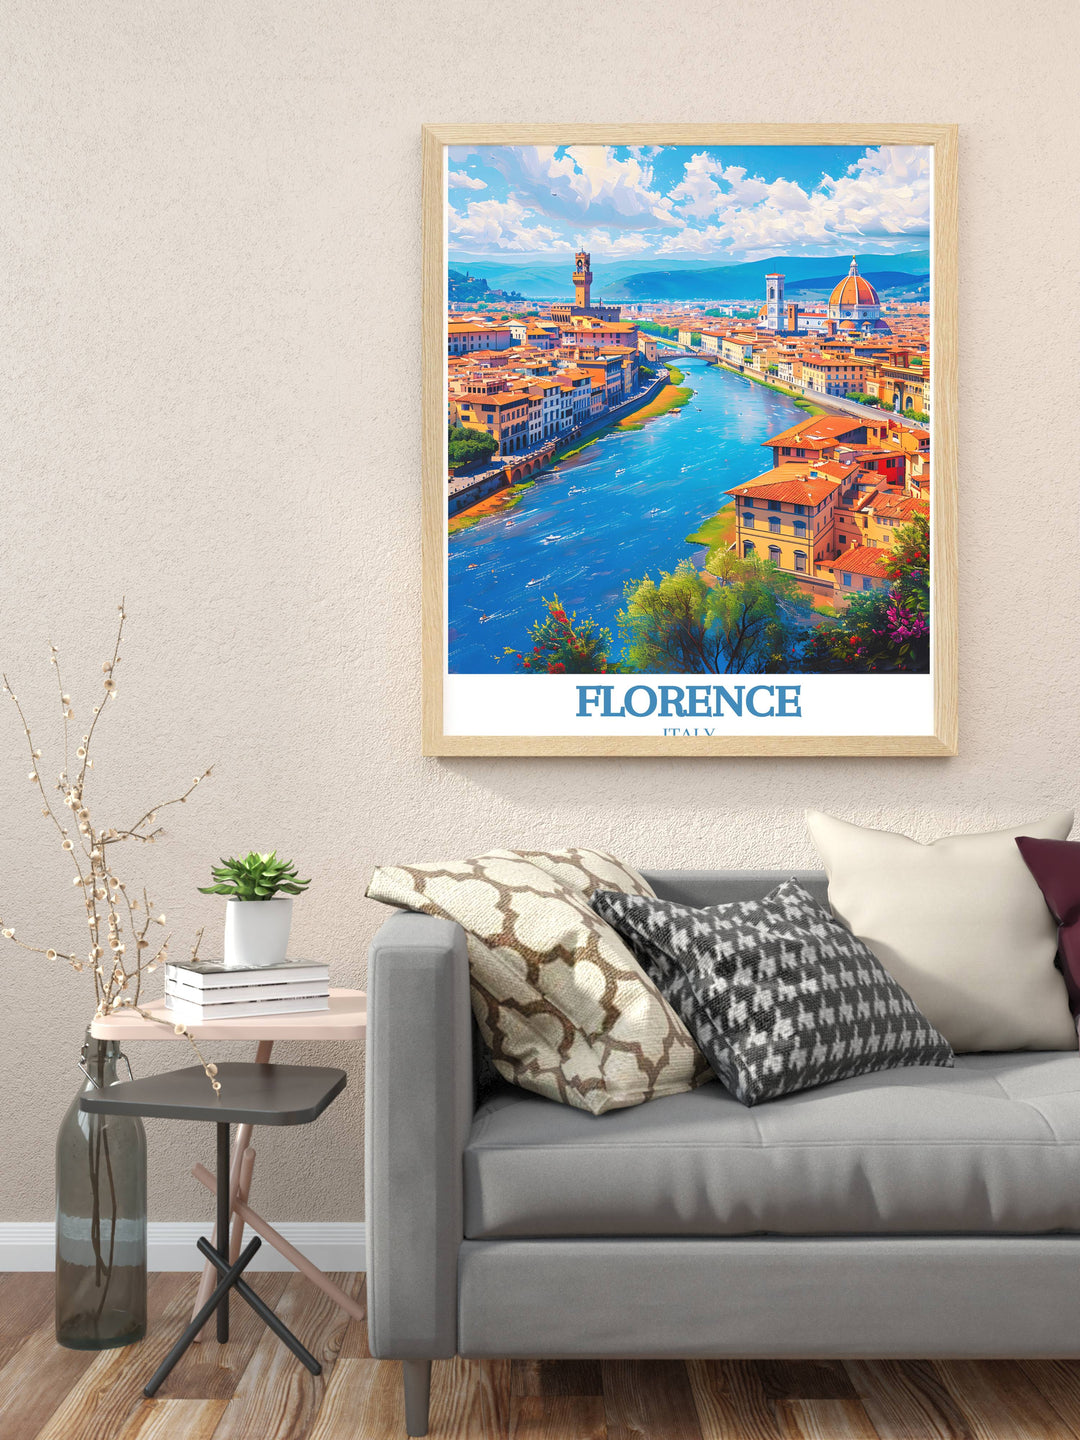 Enchanting Print of the Uffizi Gallery, highlighting the galleries architectural beauty and its pivotal role in art history, perfect for any space.